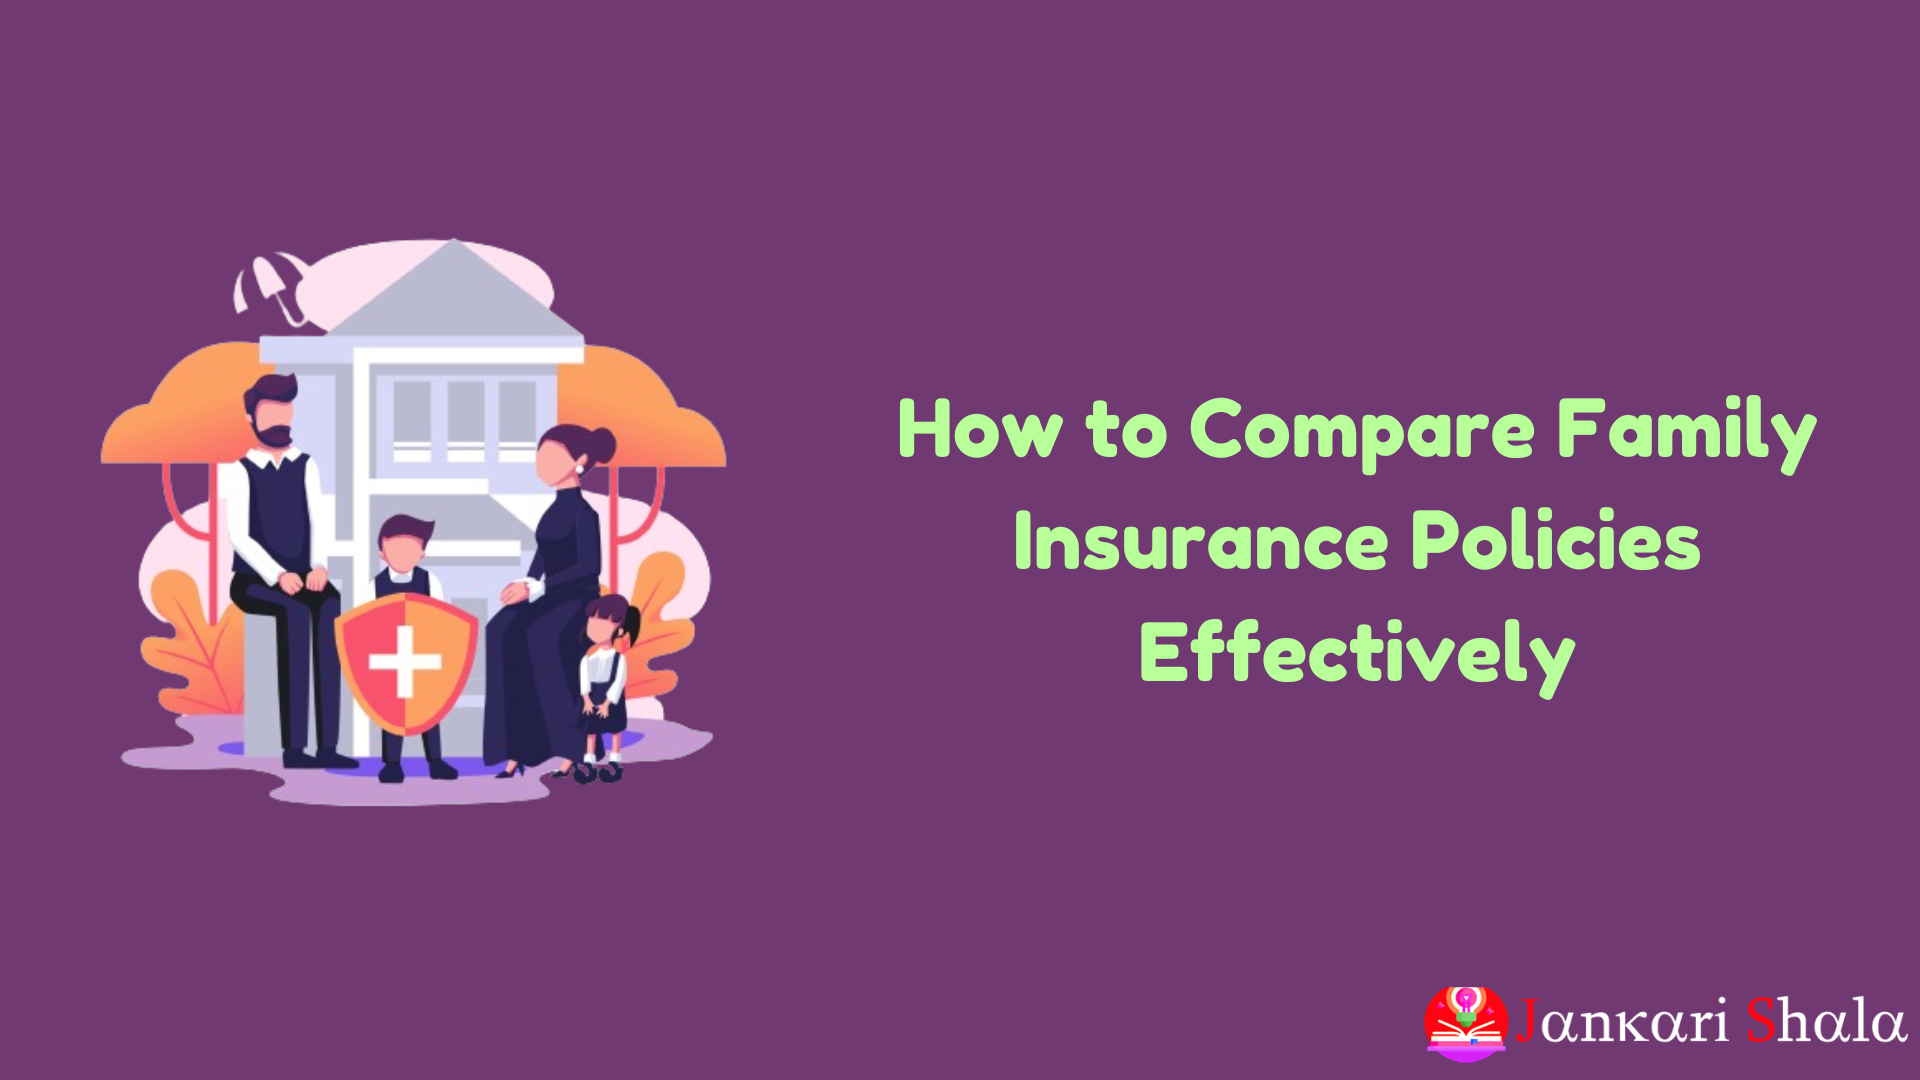 How to Compare Family Insurance Policies Effectively